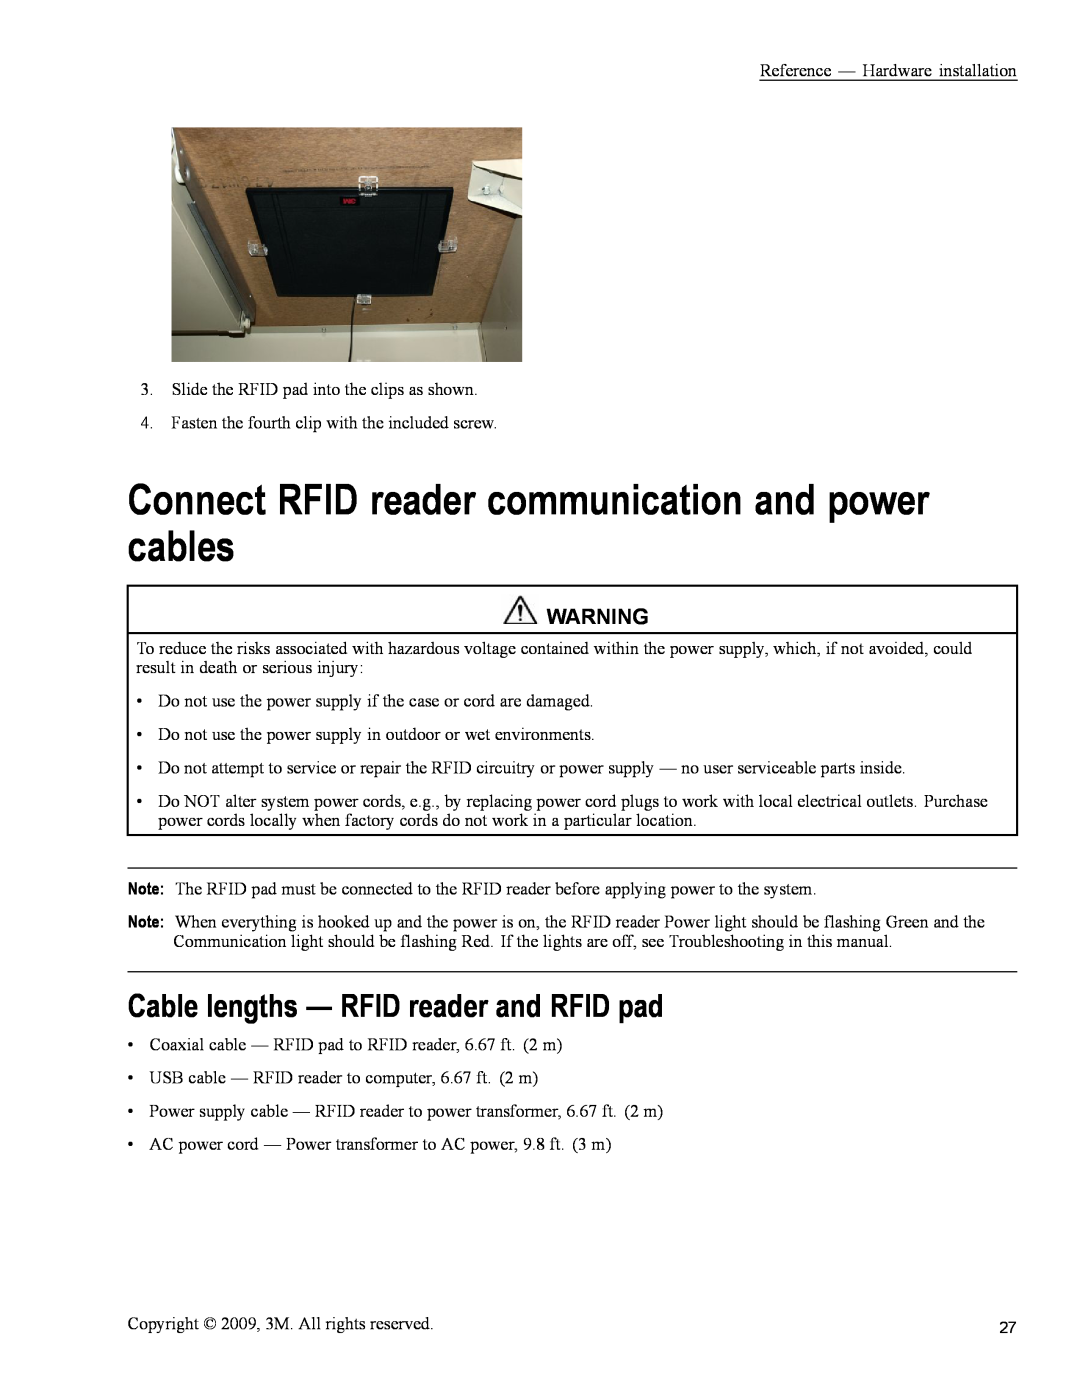 3M 813 owner manual Connect RFID reader communication and power cables, Cable lengths - RFID reader and RFID pad 